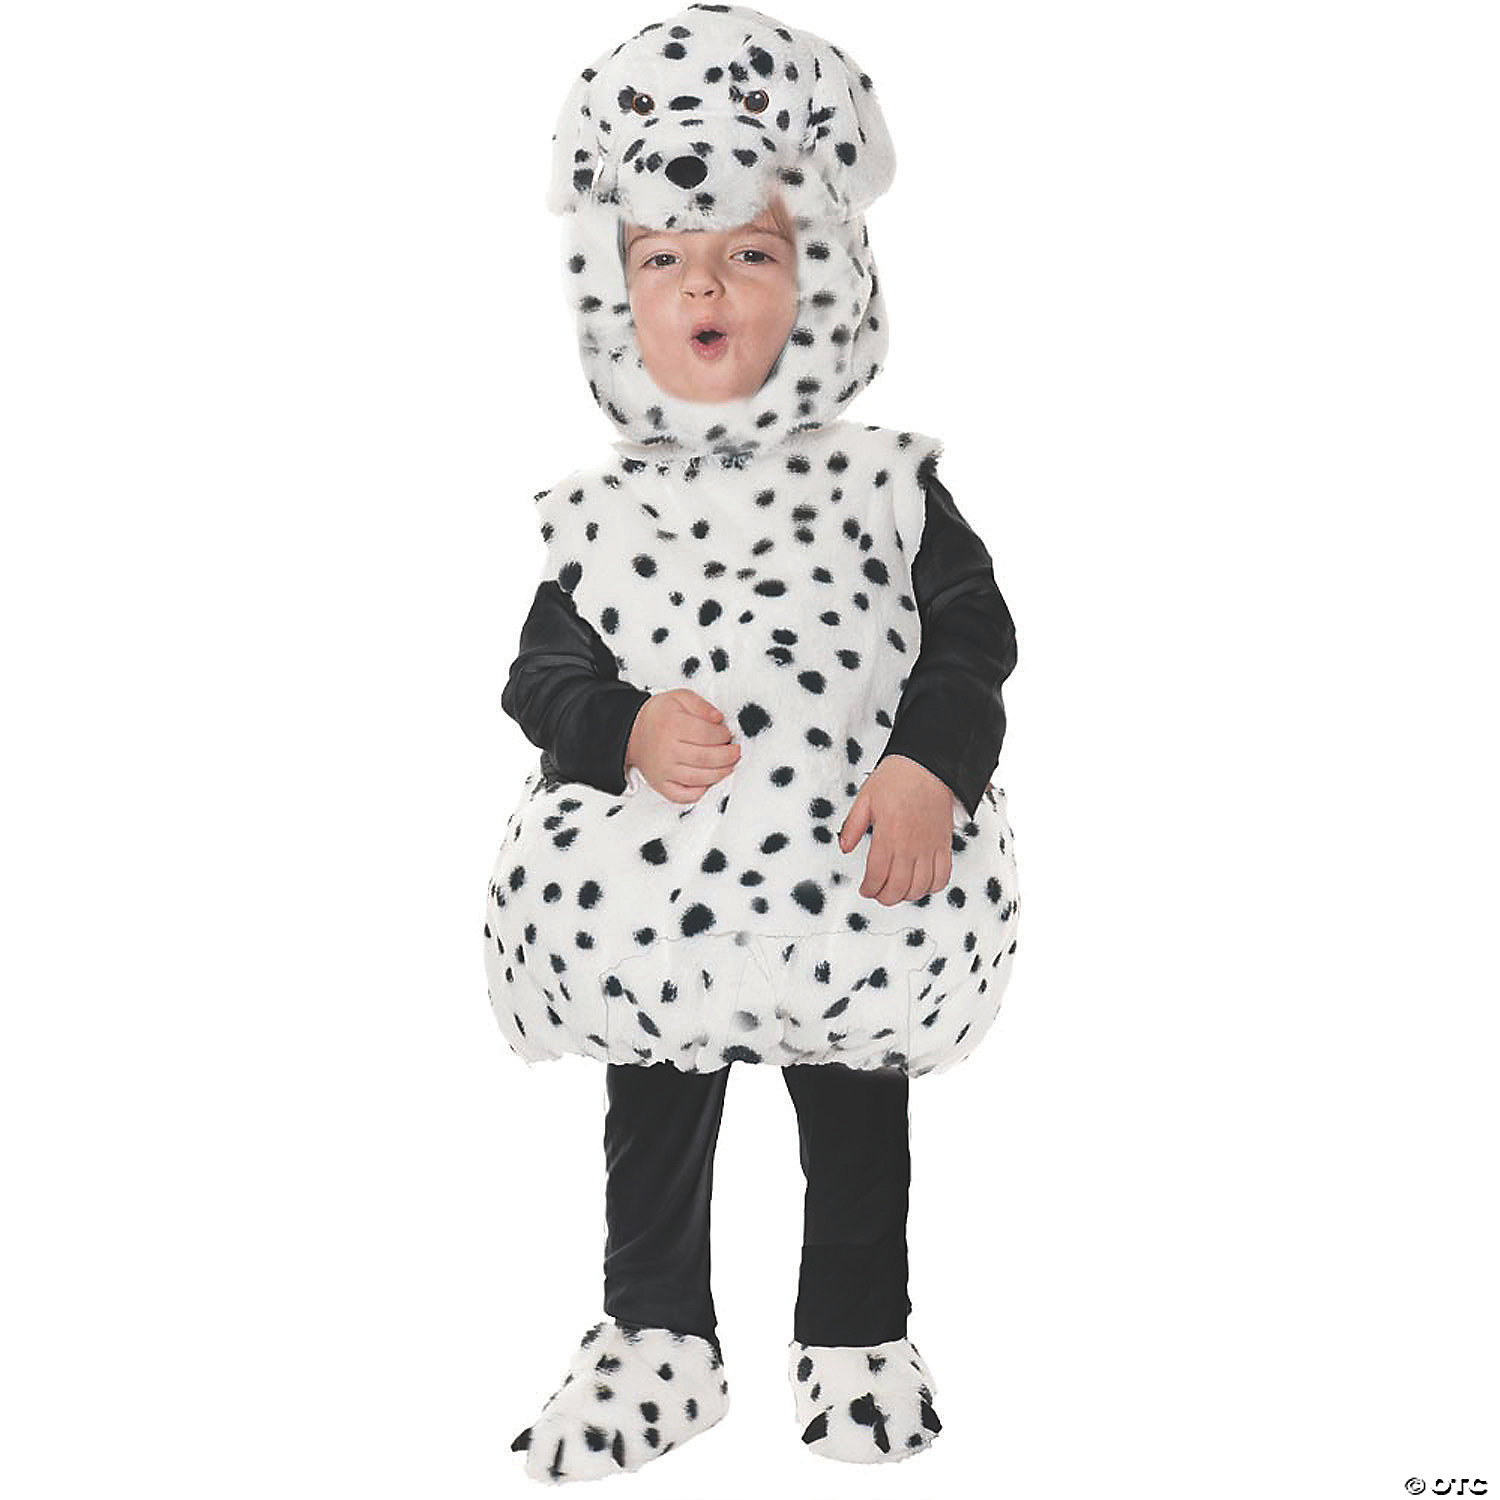 Toddler's Dalmation Costume | Oriental Trading